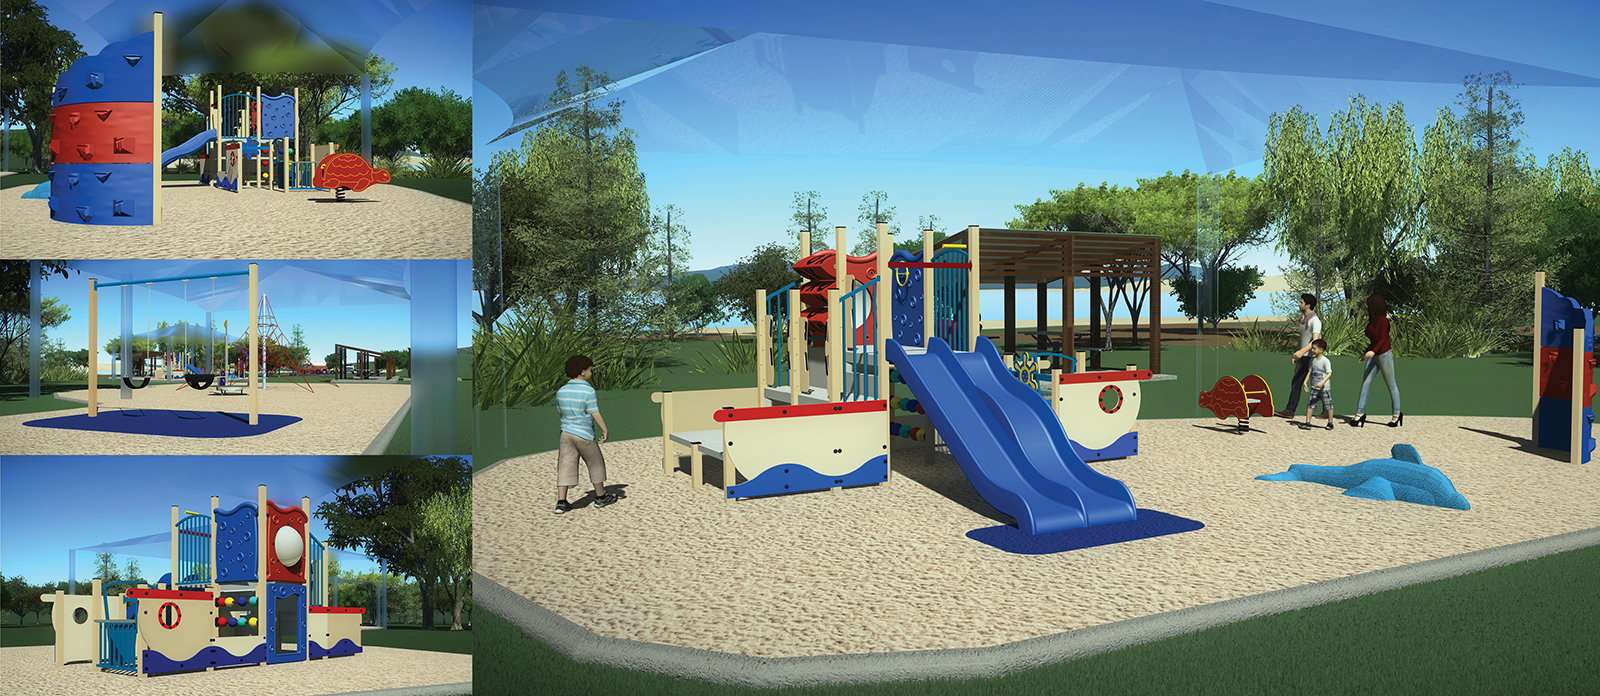 Have your say about Point Vernon playground upgrade